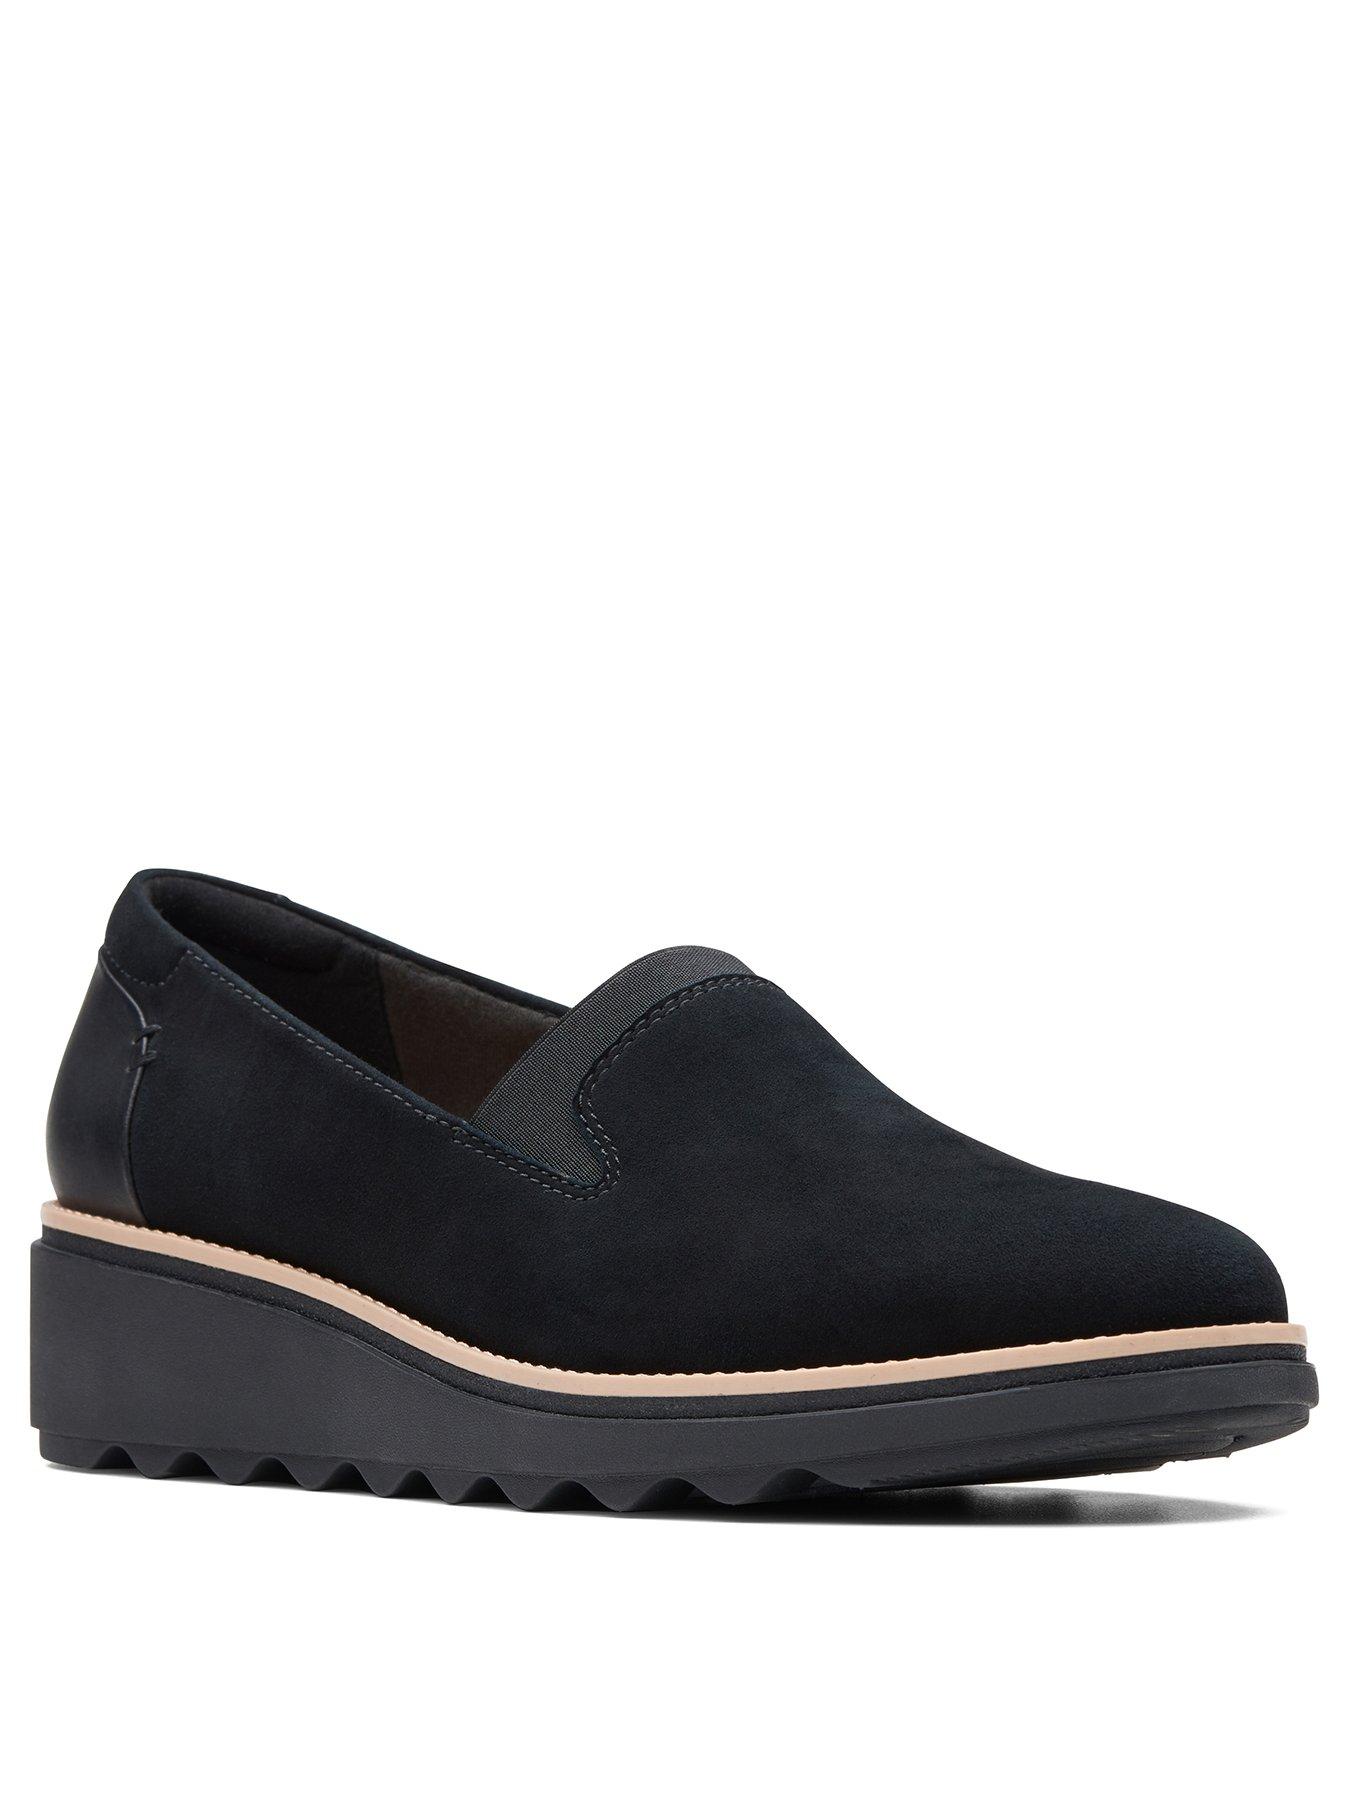 Clarks Shoes | Women's Shoes and Boots 